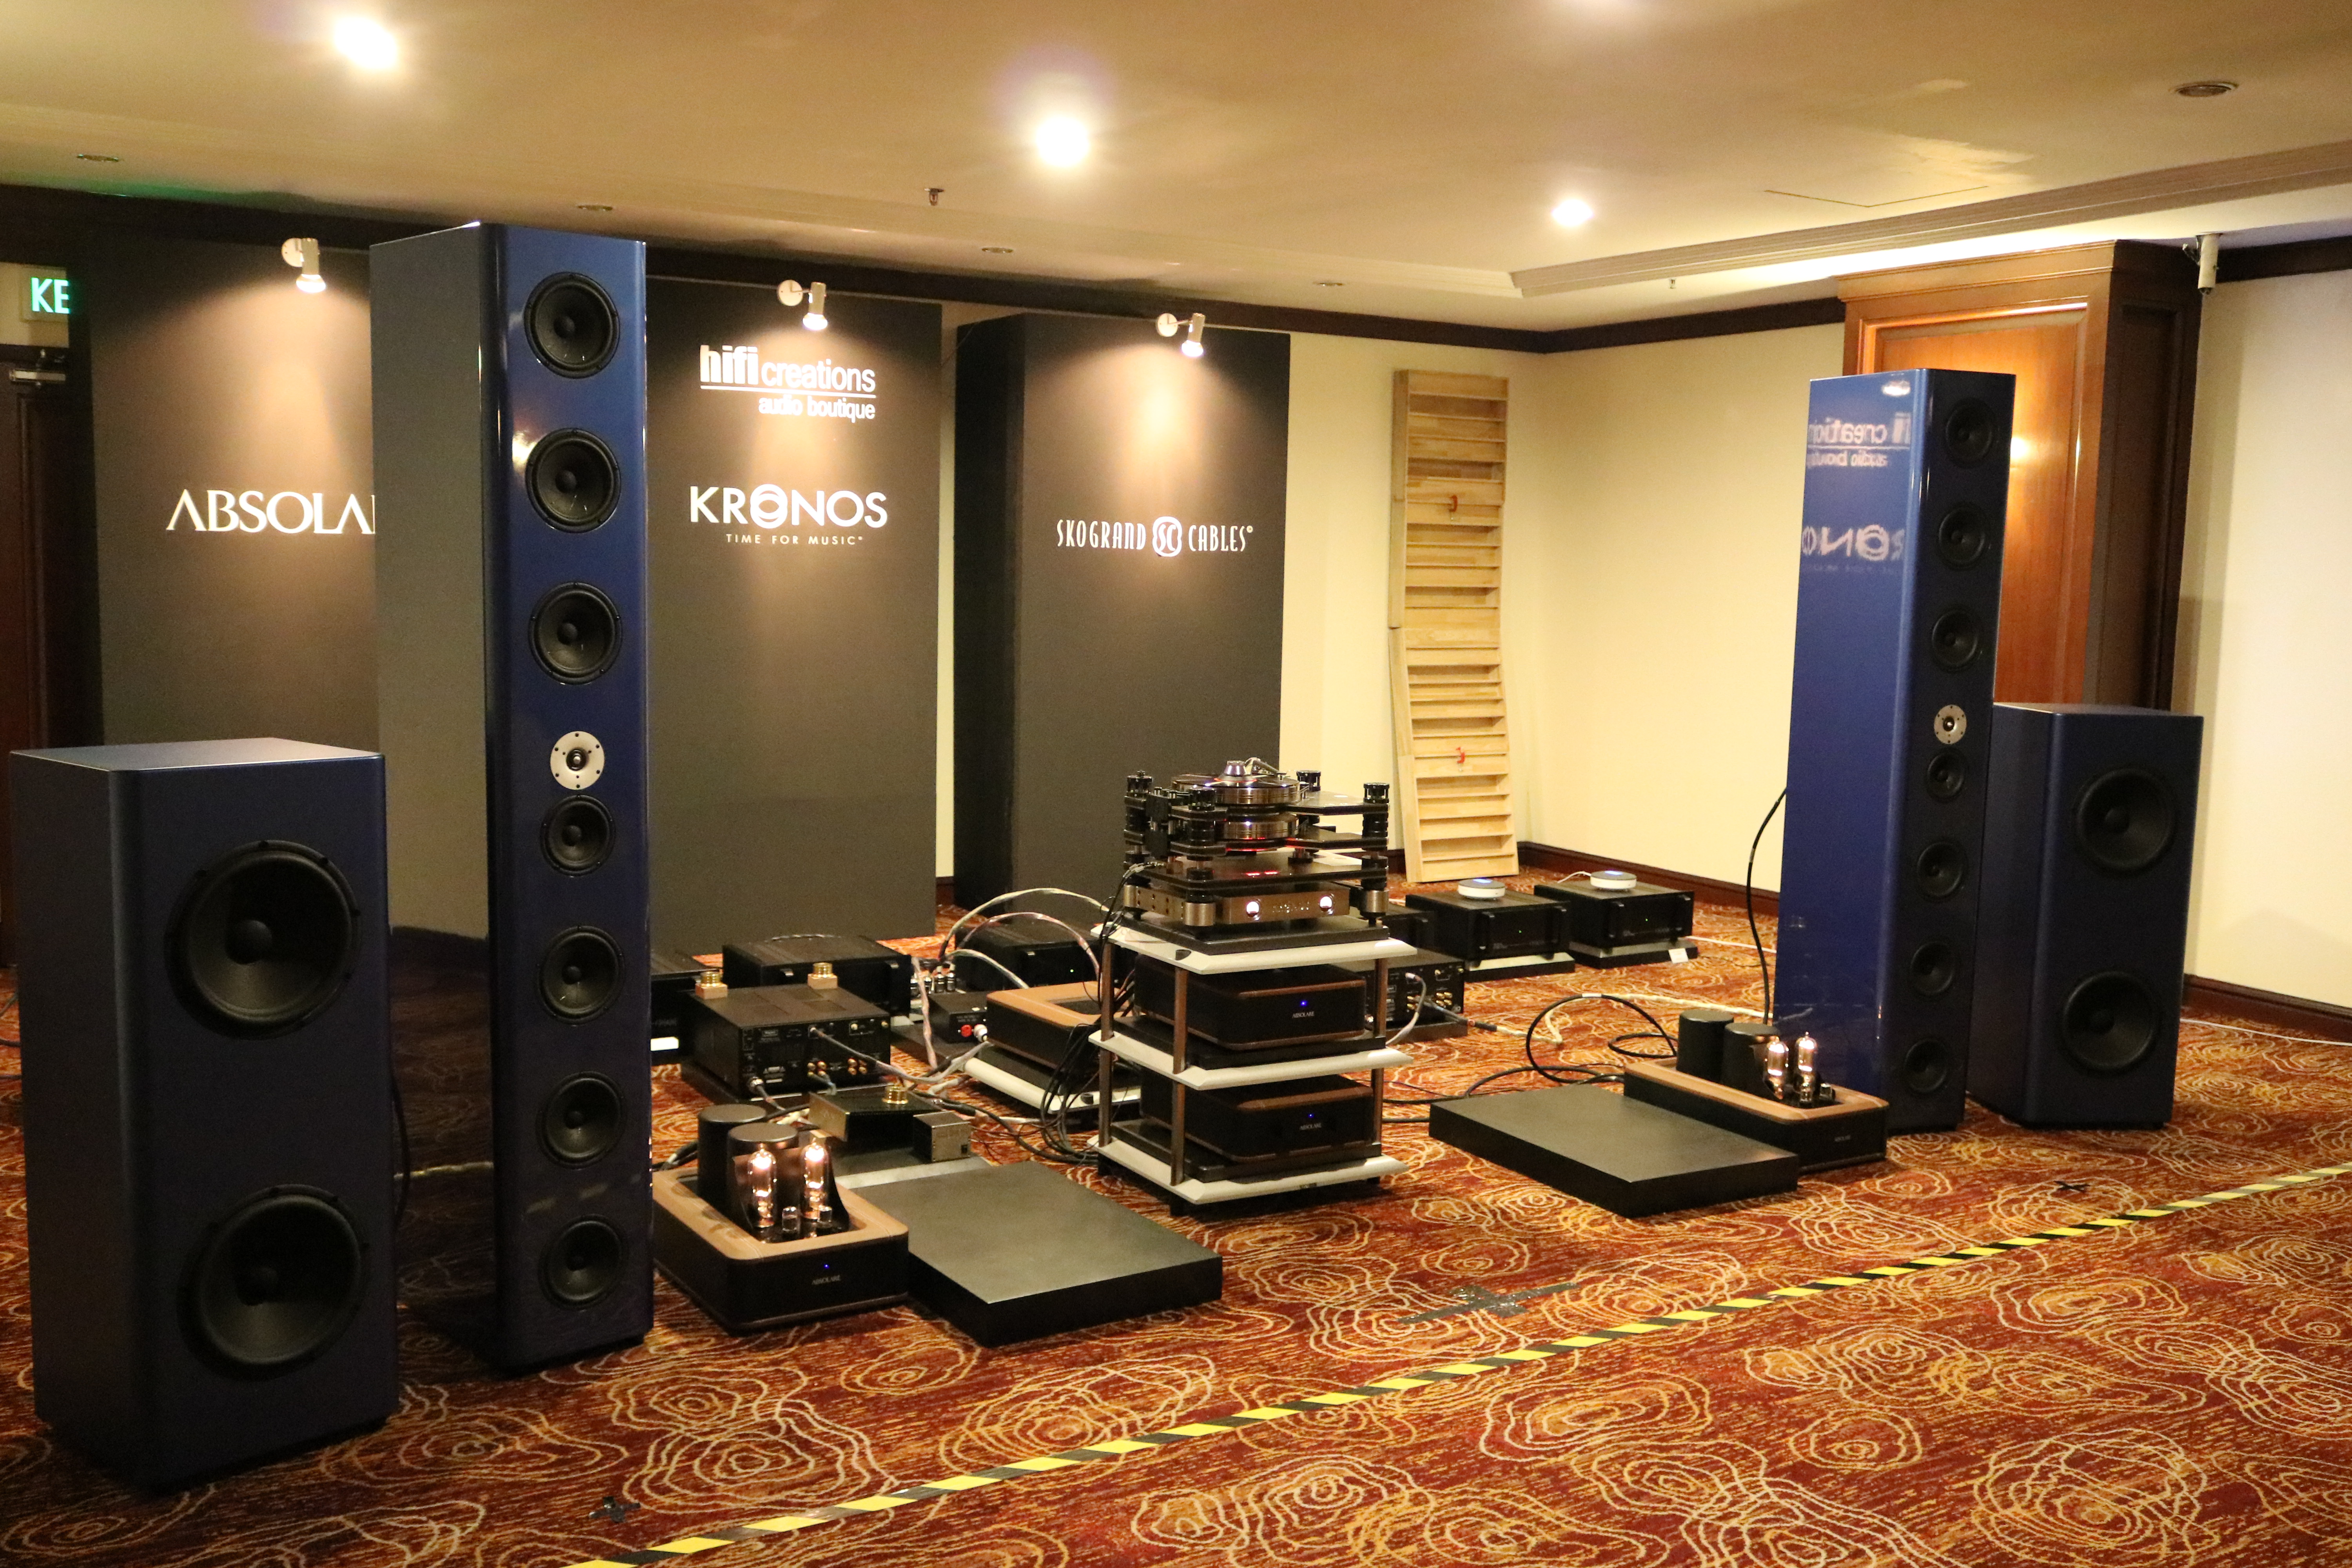 And finally, the Ocean Five speakers, Kronos Pro turntable, Absolare tube amps and Frank power banks in hifi creations' room.